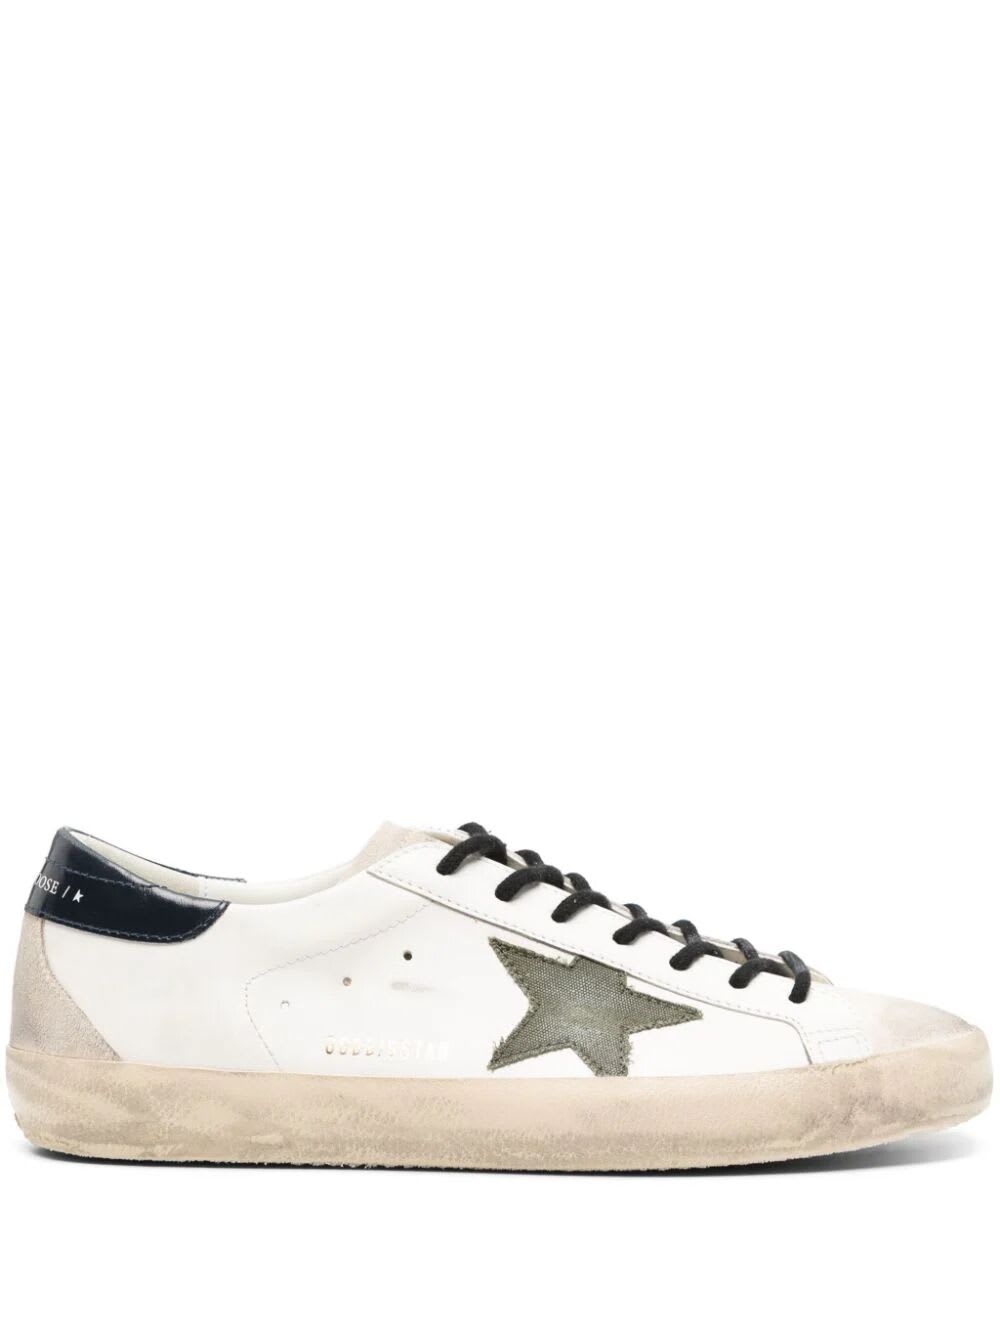 Shop Golden Goose Super Star Sneakers In White Seedpearl Green Blue